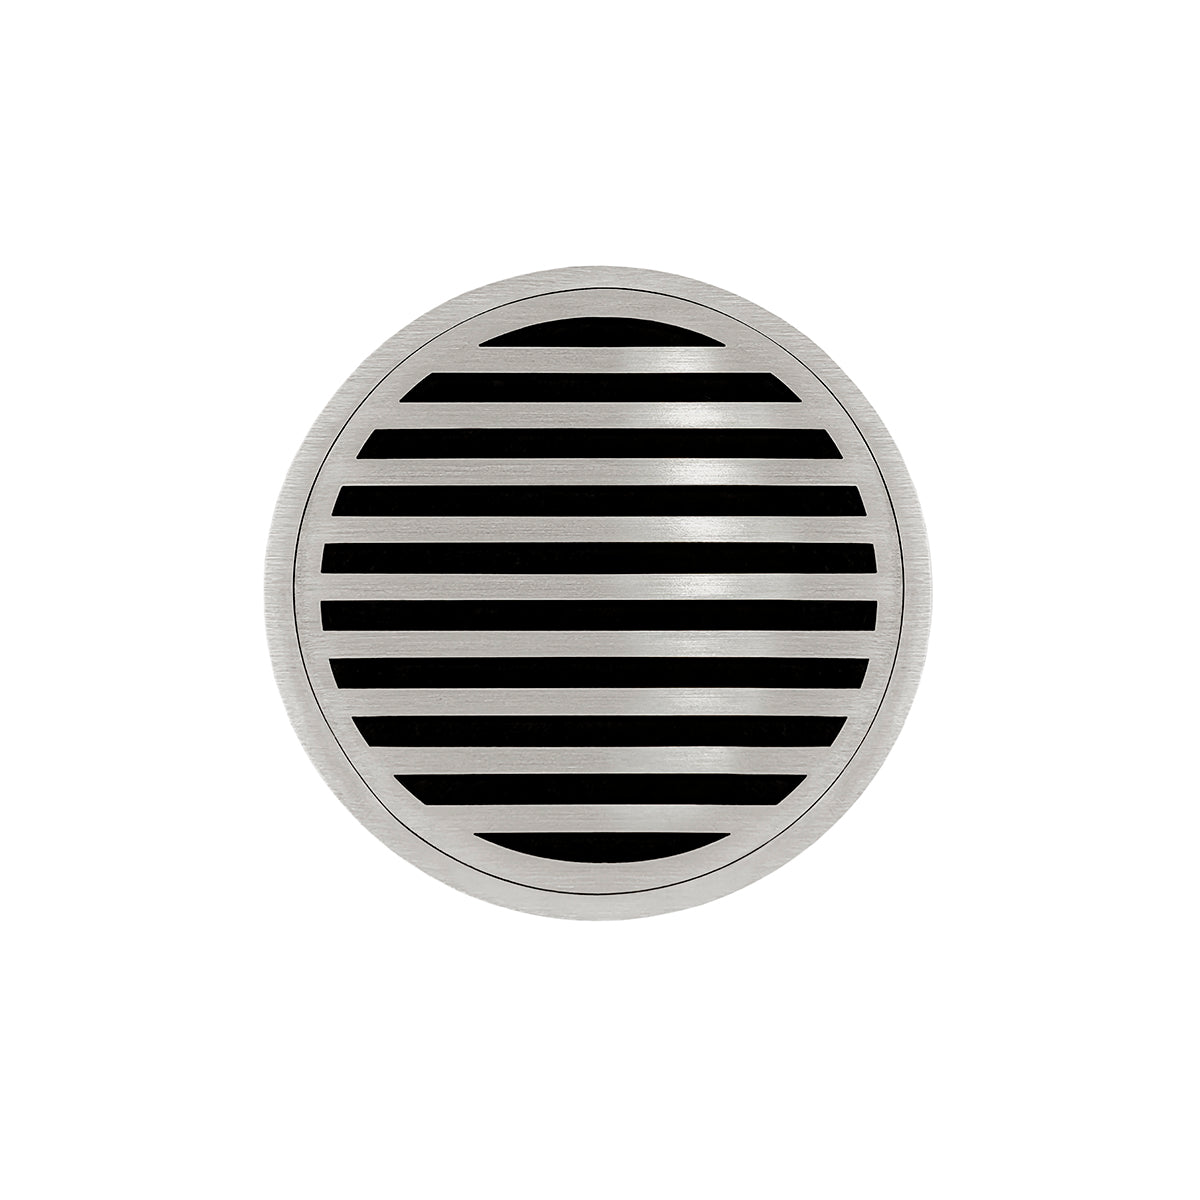 Infinity Drain 5" Round RND 5 High Flow Premium Center Drain Kit with Lines Pattern Decorative Plate with PVC Drain Body, 3" Outlet